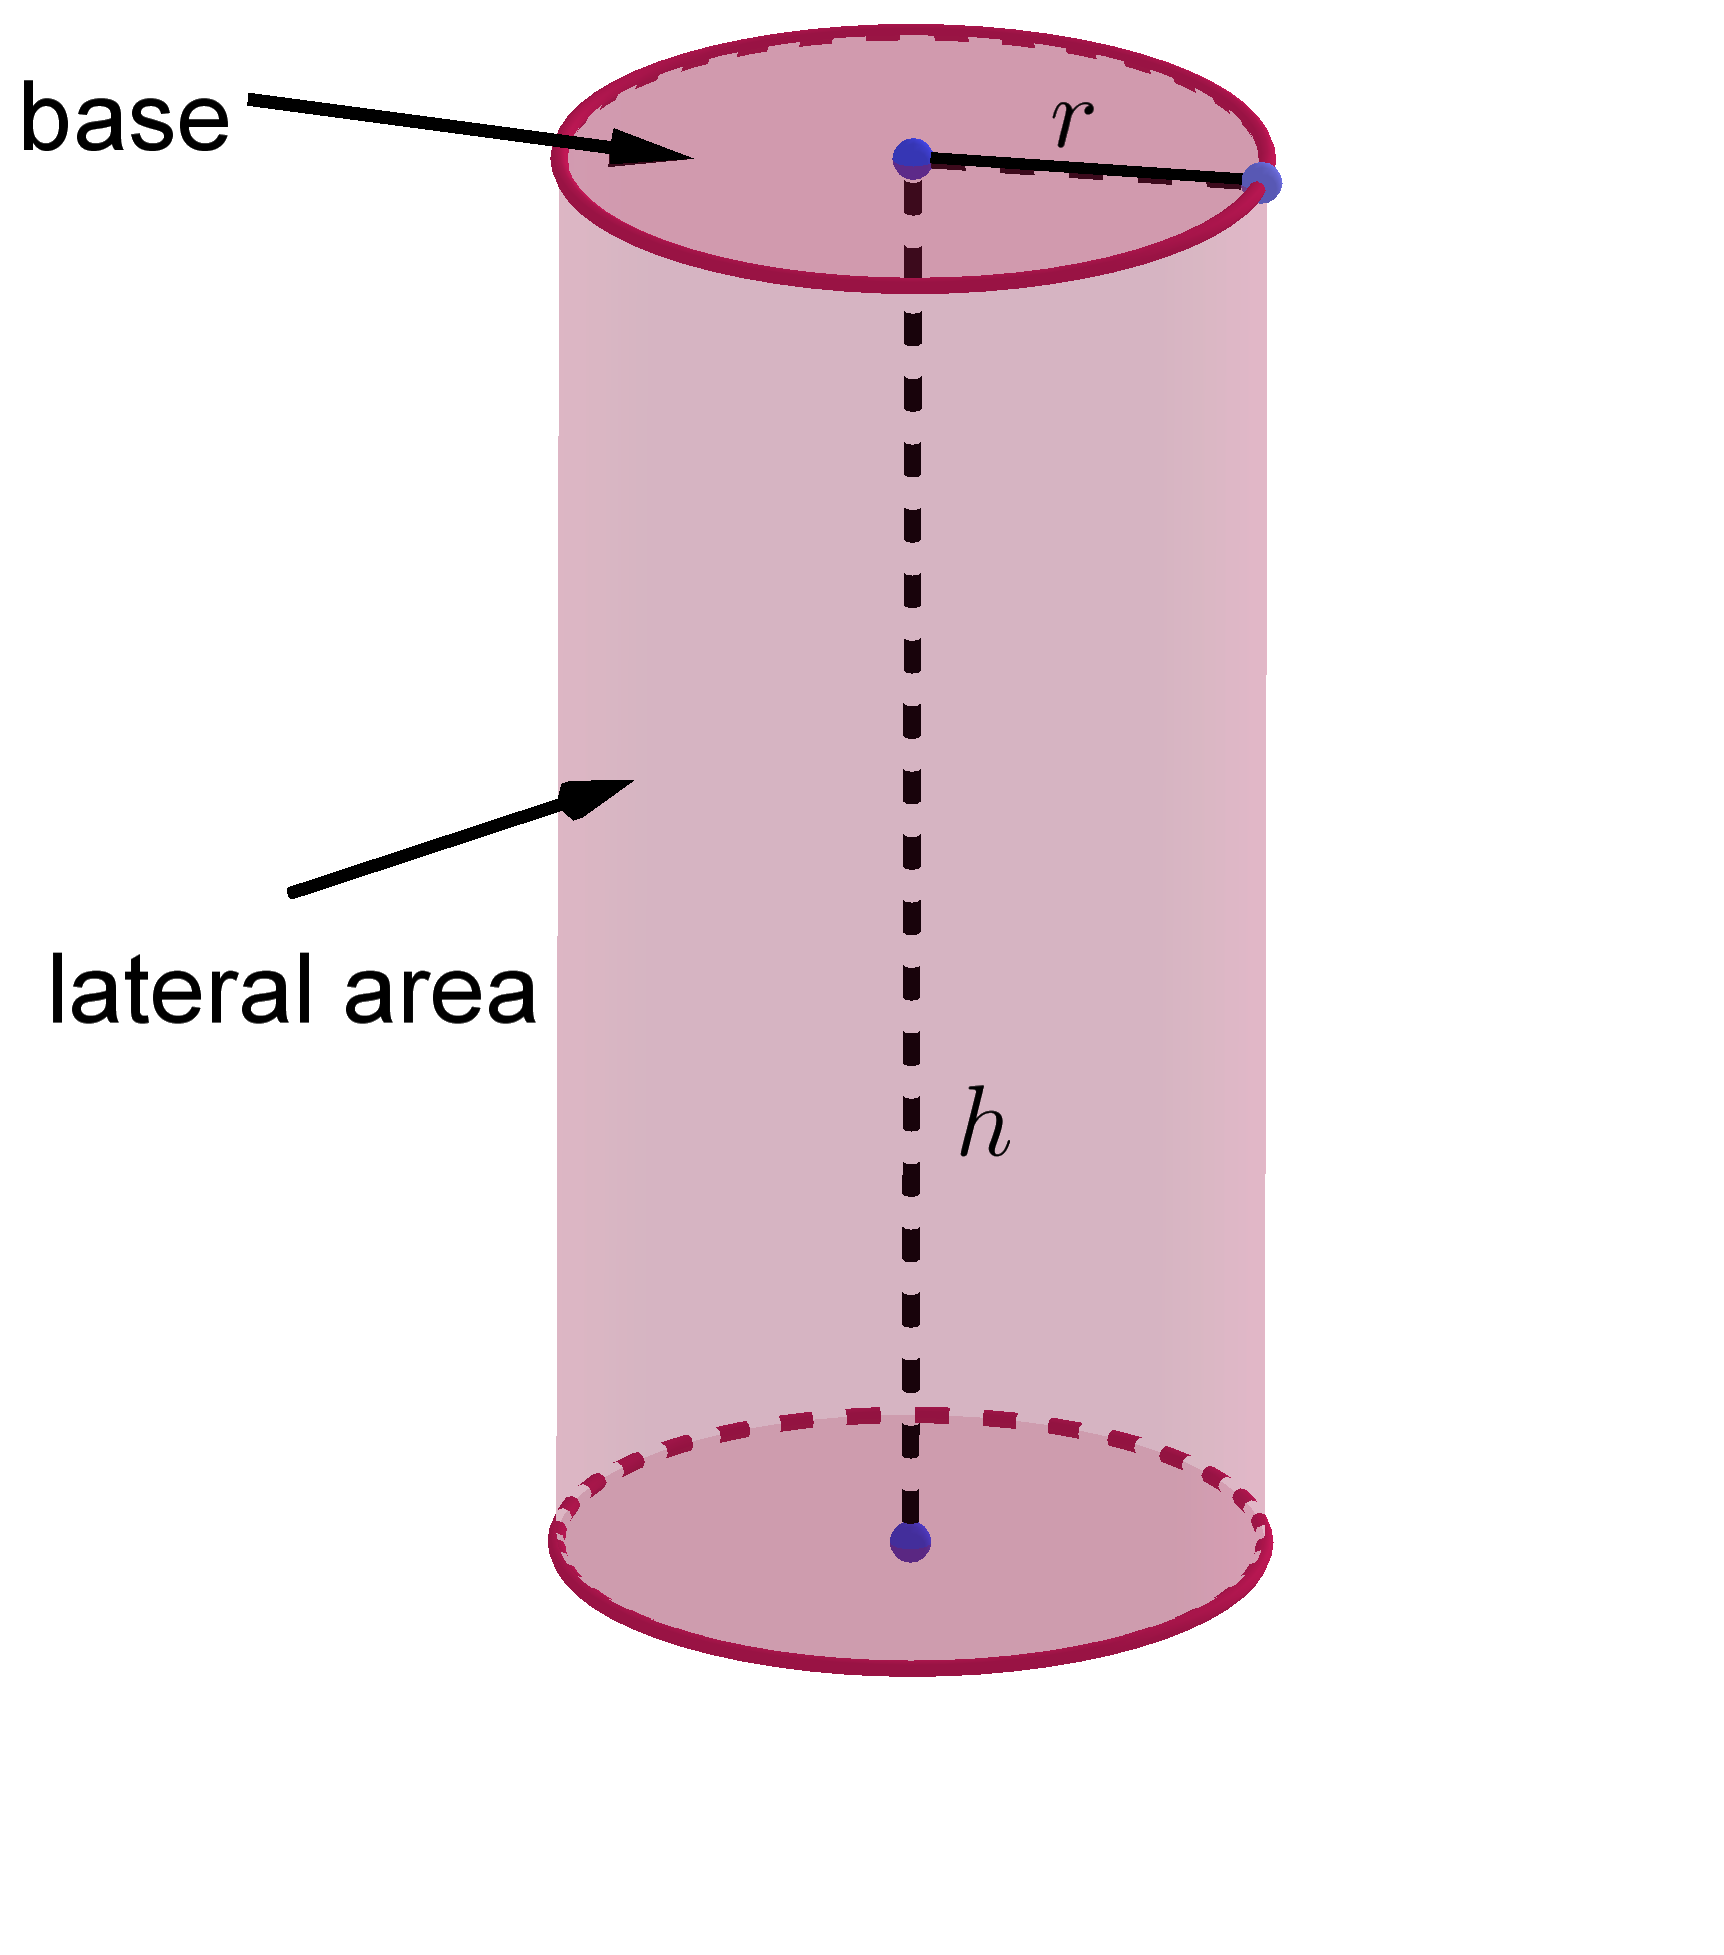 cylinder shape and measurements